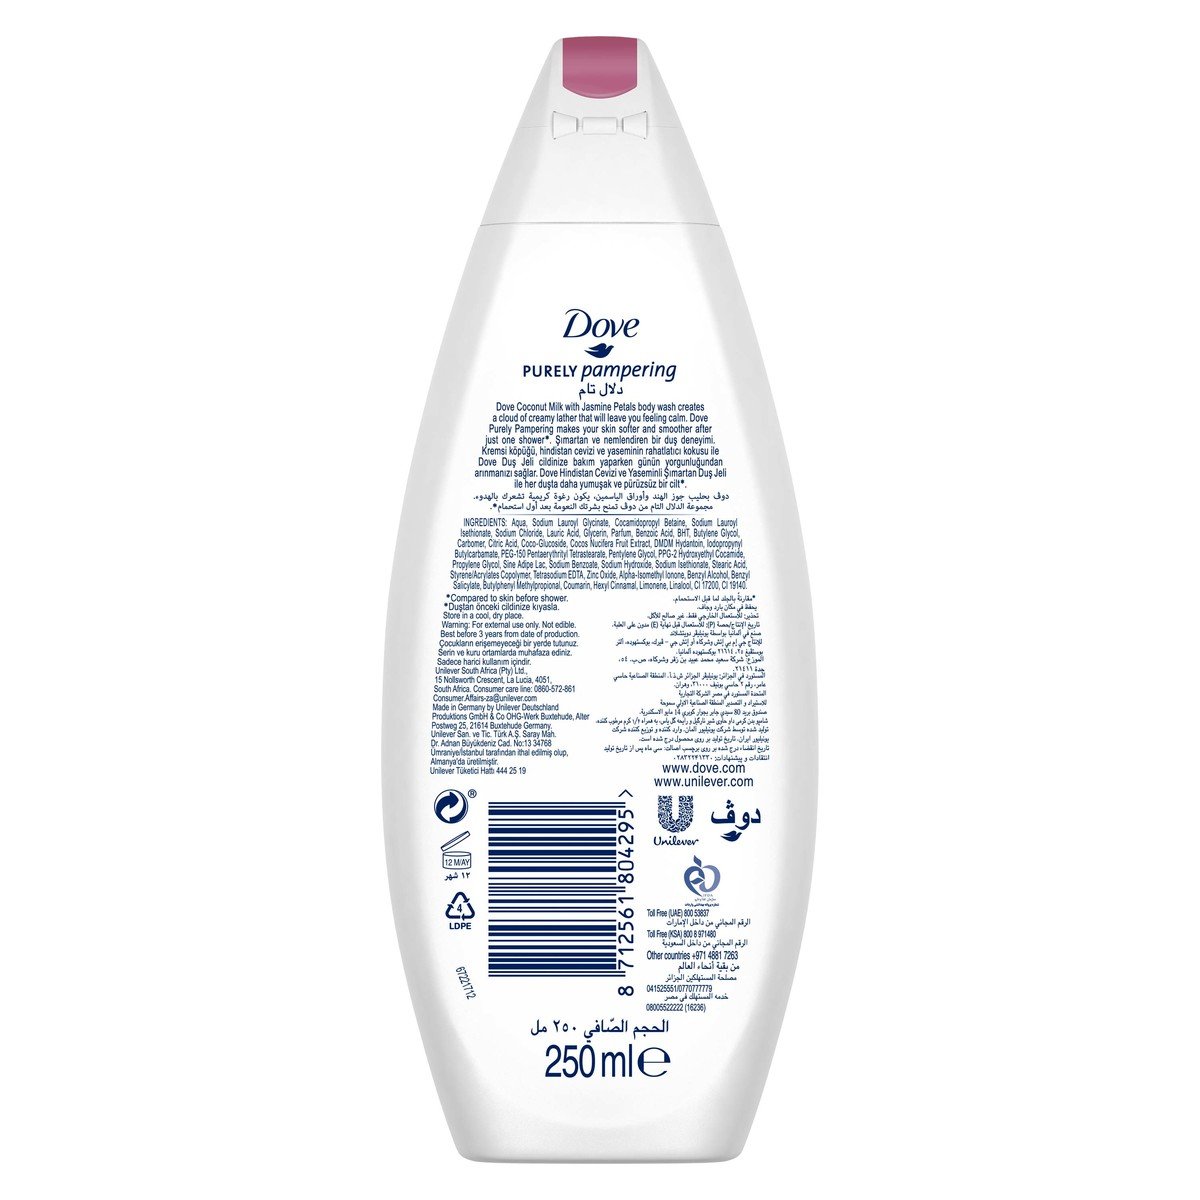 Dove Purely Pampering Body Wash Coconut Milk 250 ml